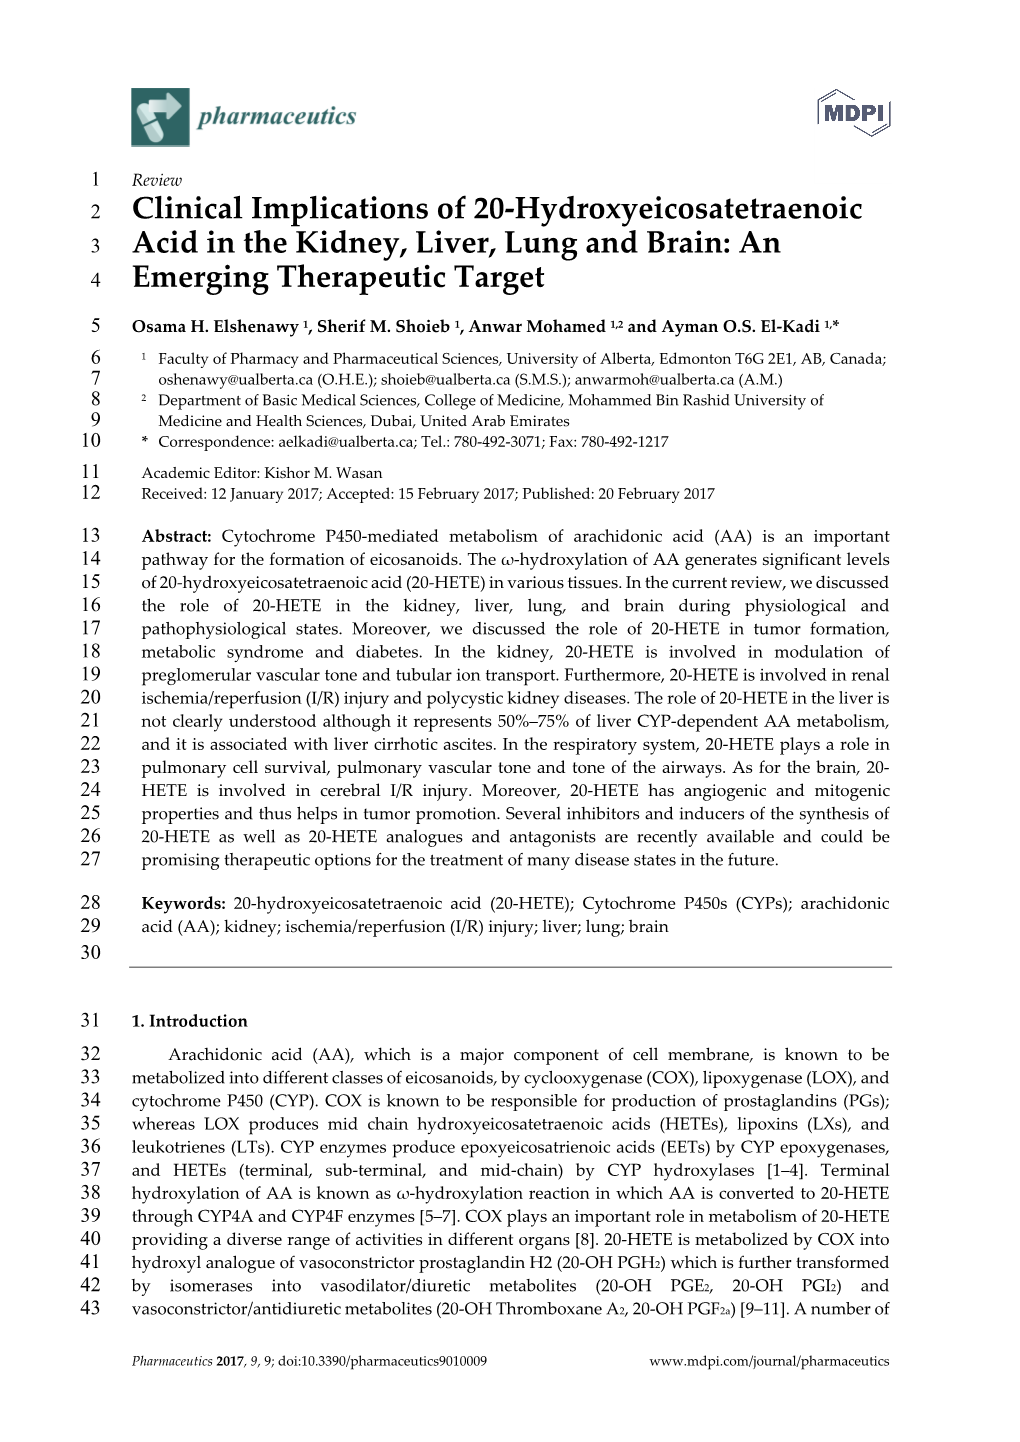 Clinical Implications of 20-Hydroxyeicosatetraenoic Acid in the Kidney, Liver, Lung and Brain